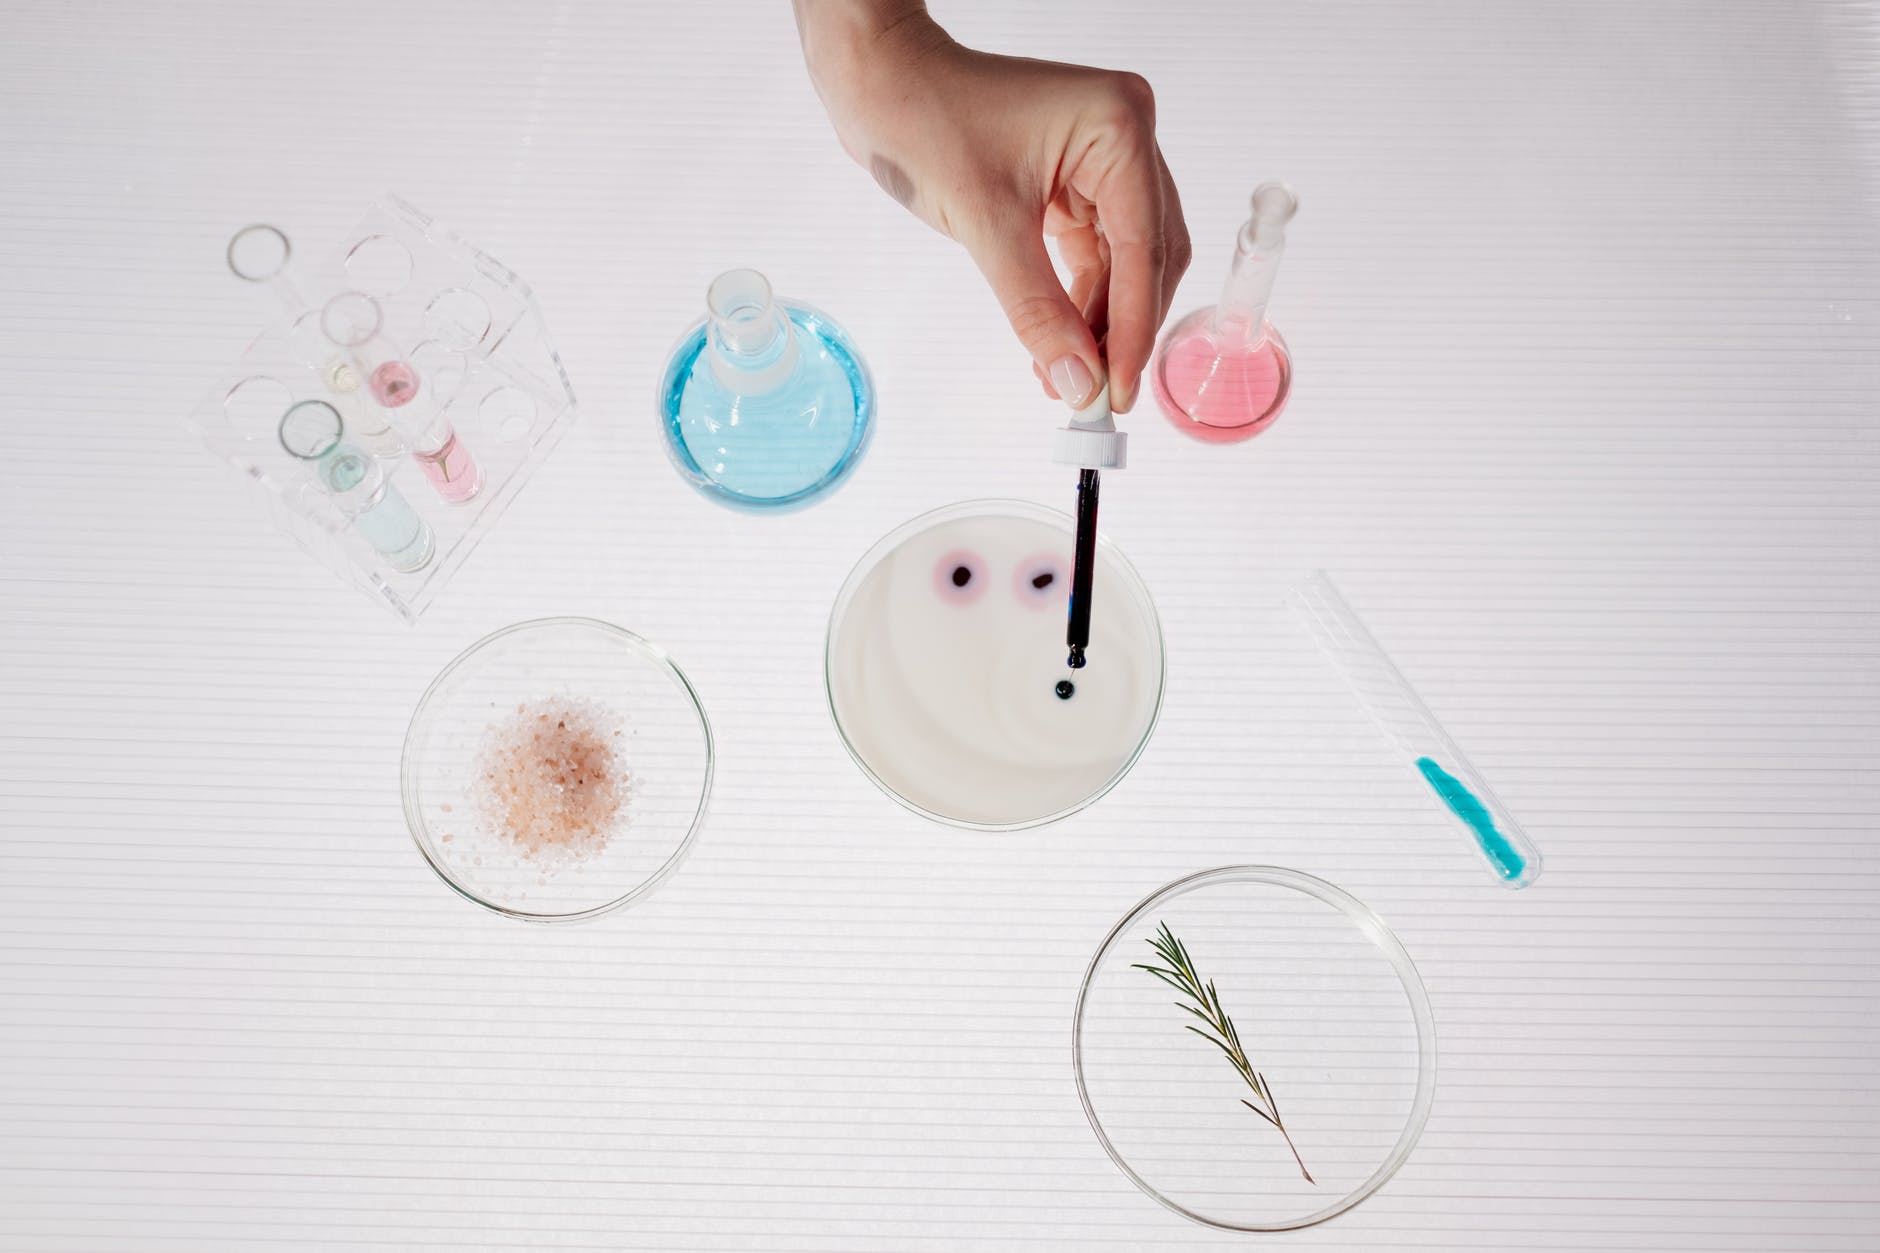 an above shot of a hand pouring a liquid into a petri dishes